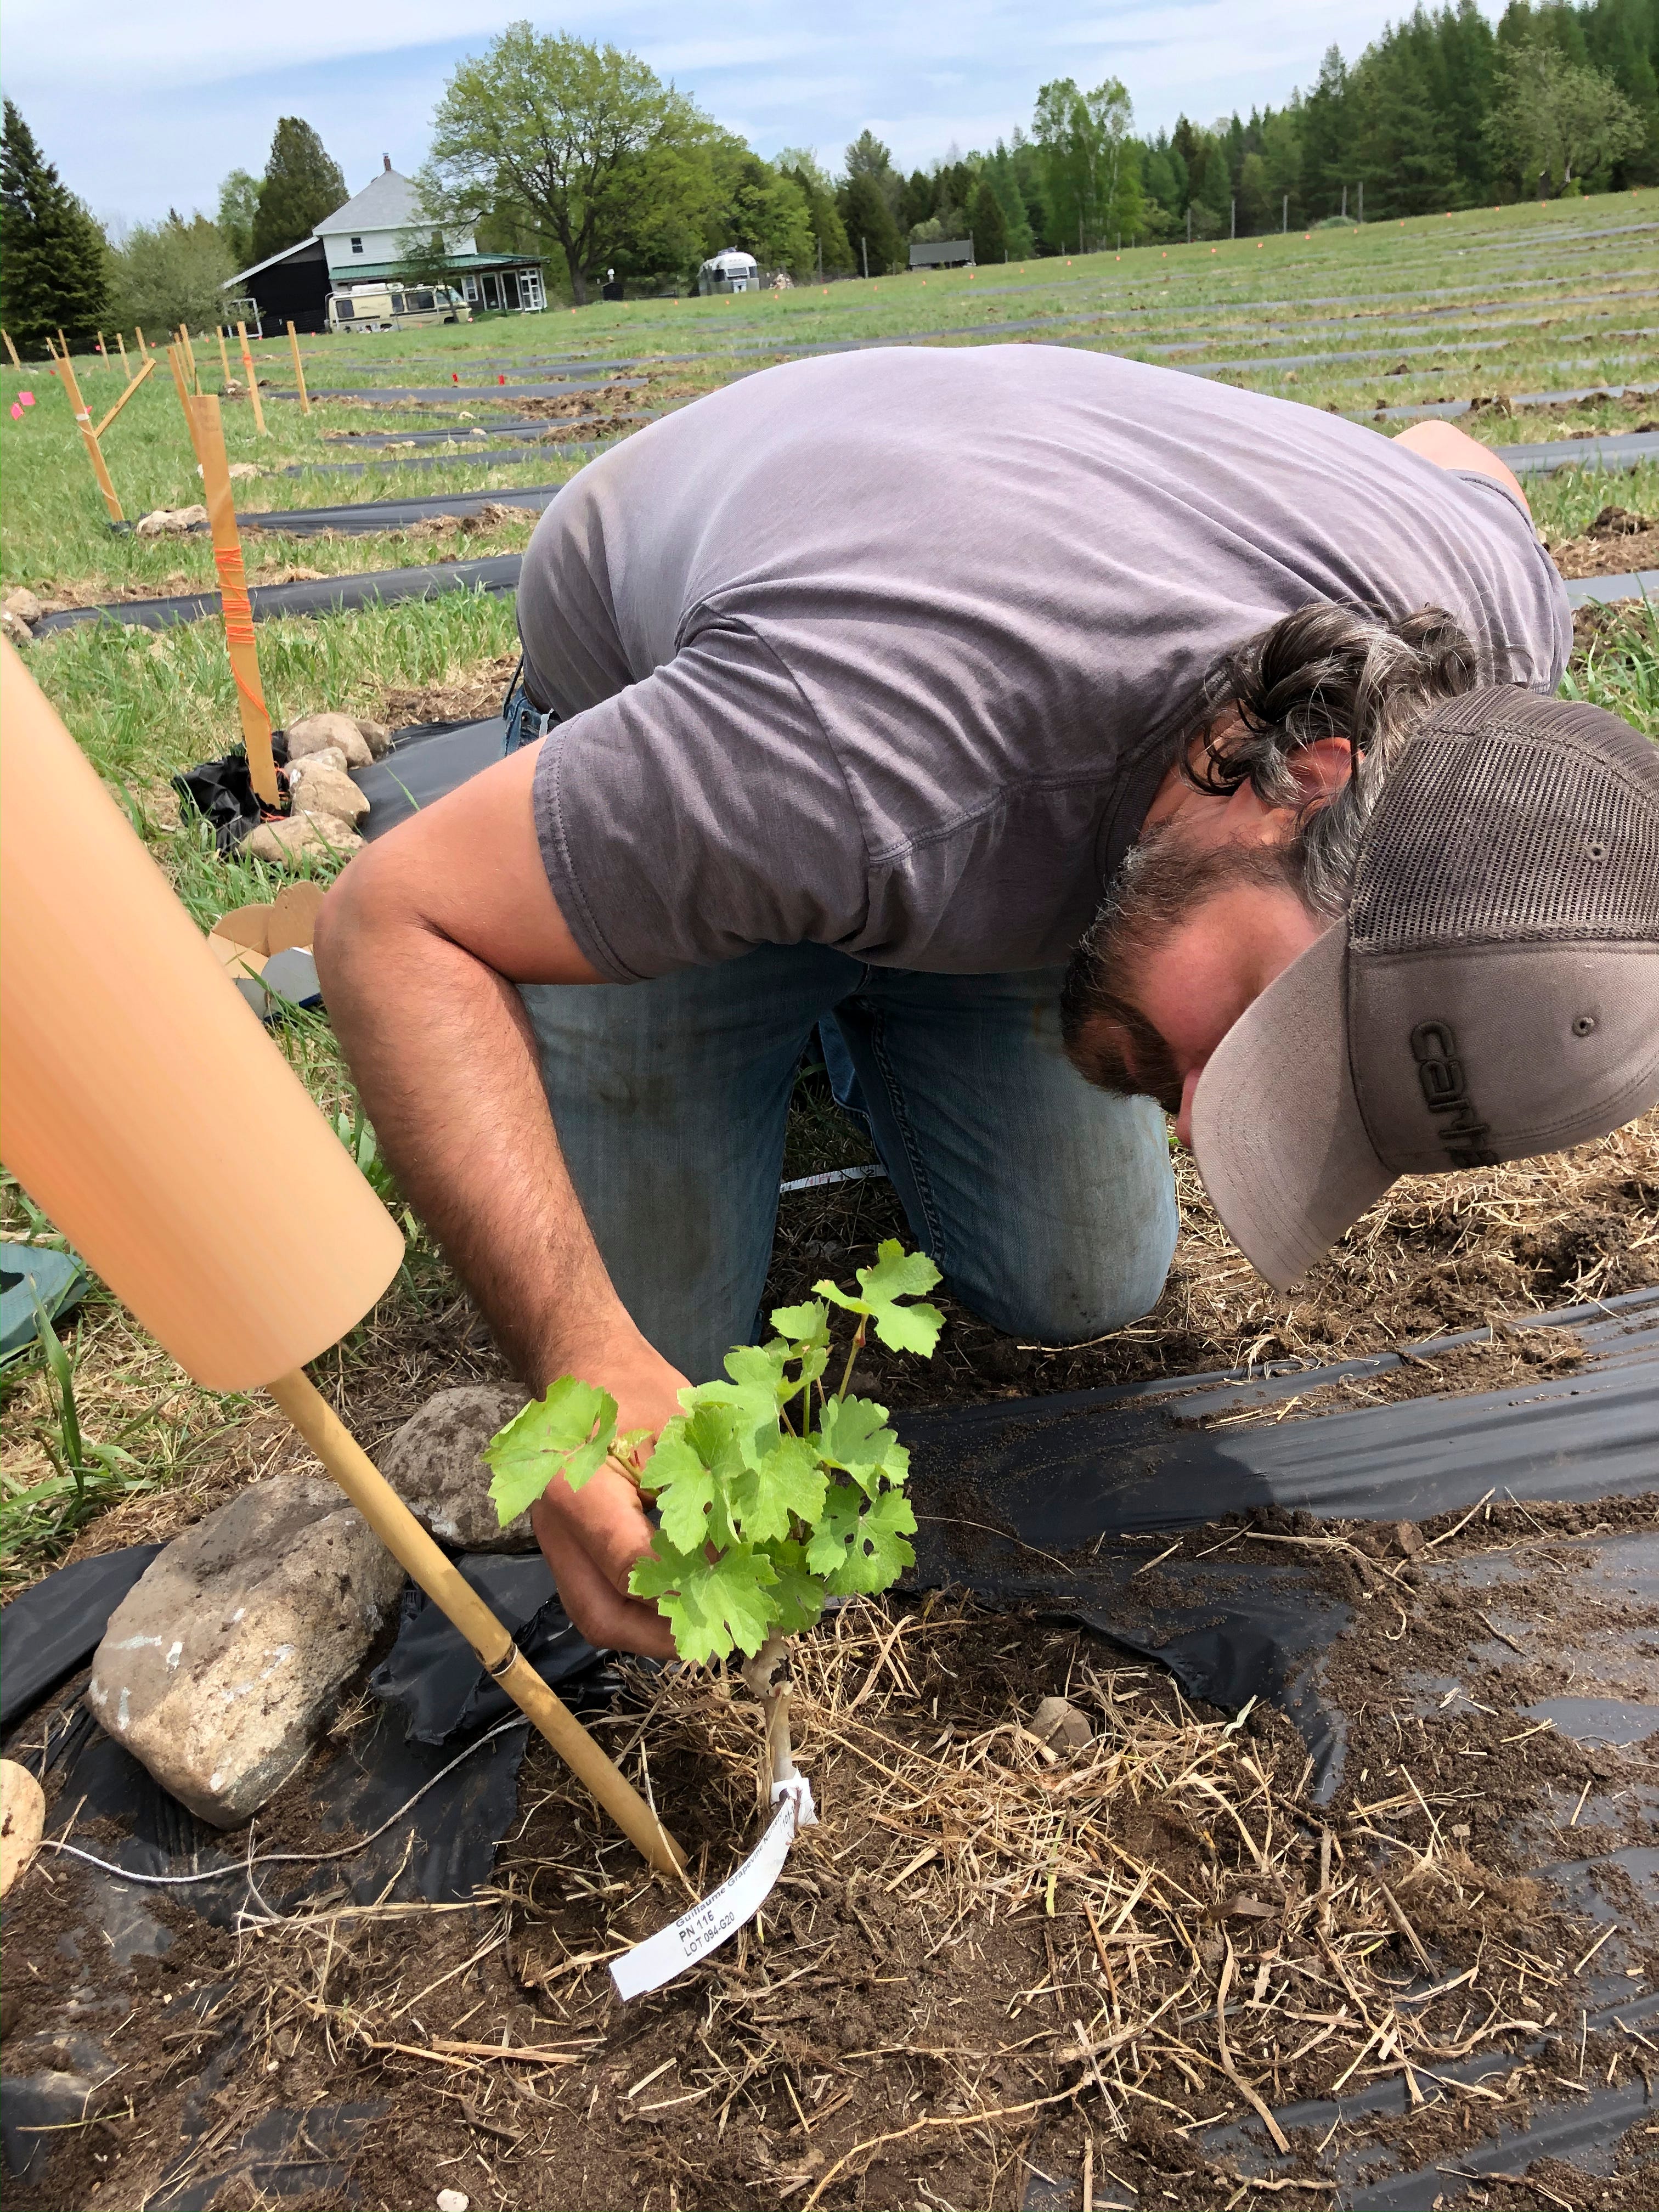 Adam Kendall plants the first vine, a small test run of Pinot Noir from California, that came shipped as potted plants, rather than bare roots.